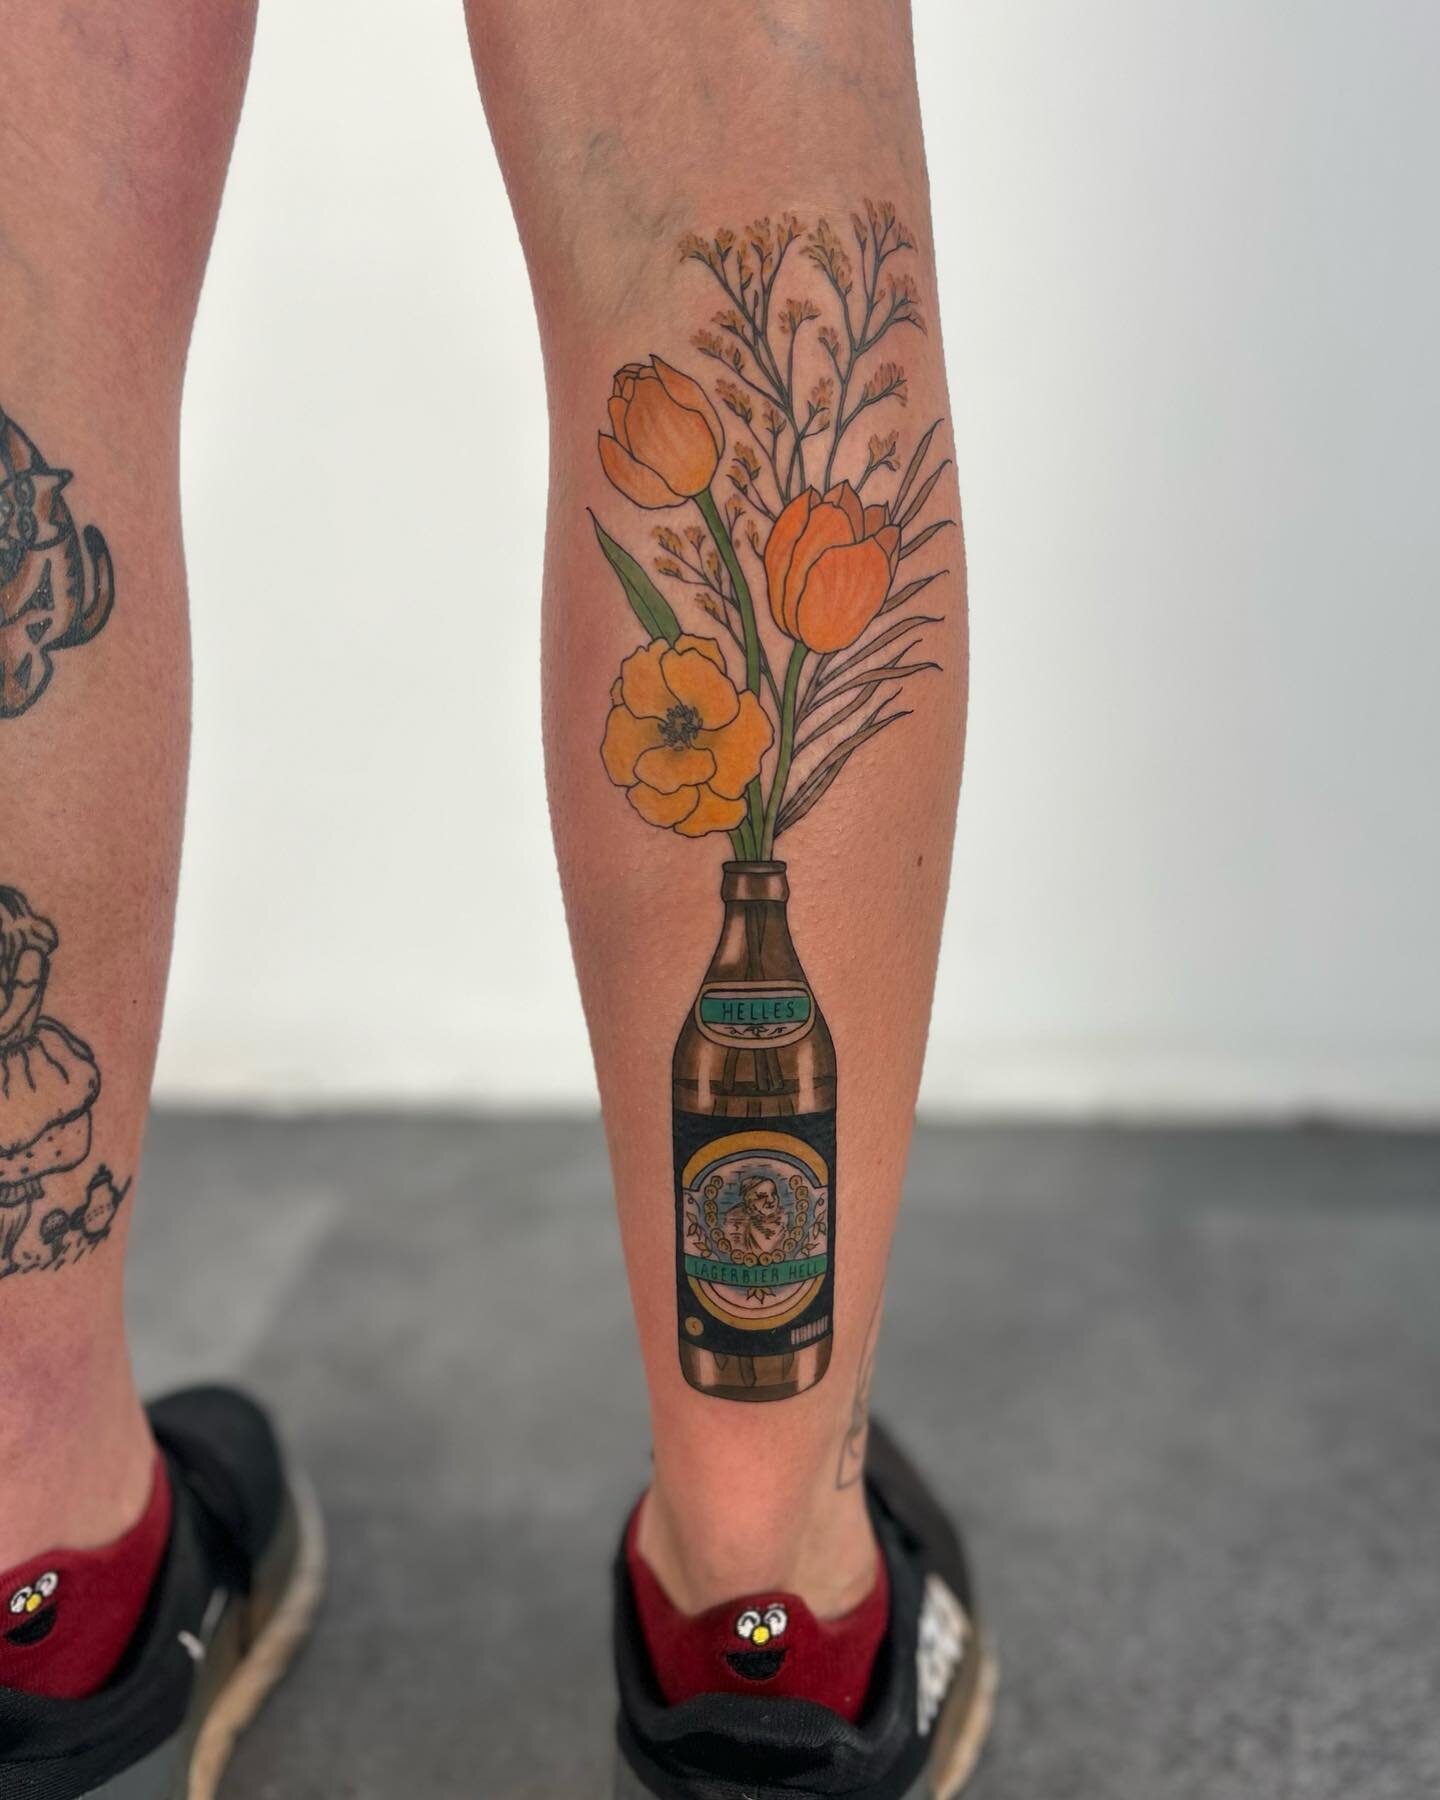 Flowers in an Augustiner-Br&auml;u beer bottle? Sounds like a great idea for wedding centrepieces and also for a tattoo, thanks for trusting me with this Jayde! ✨